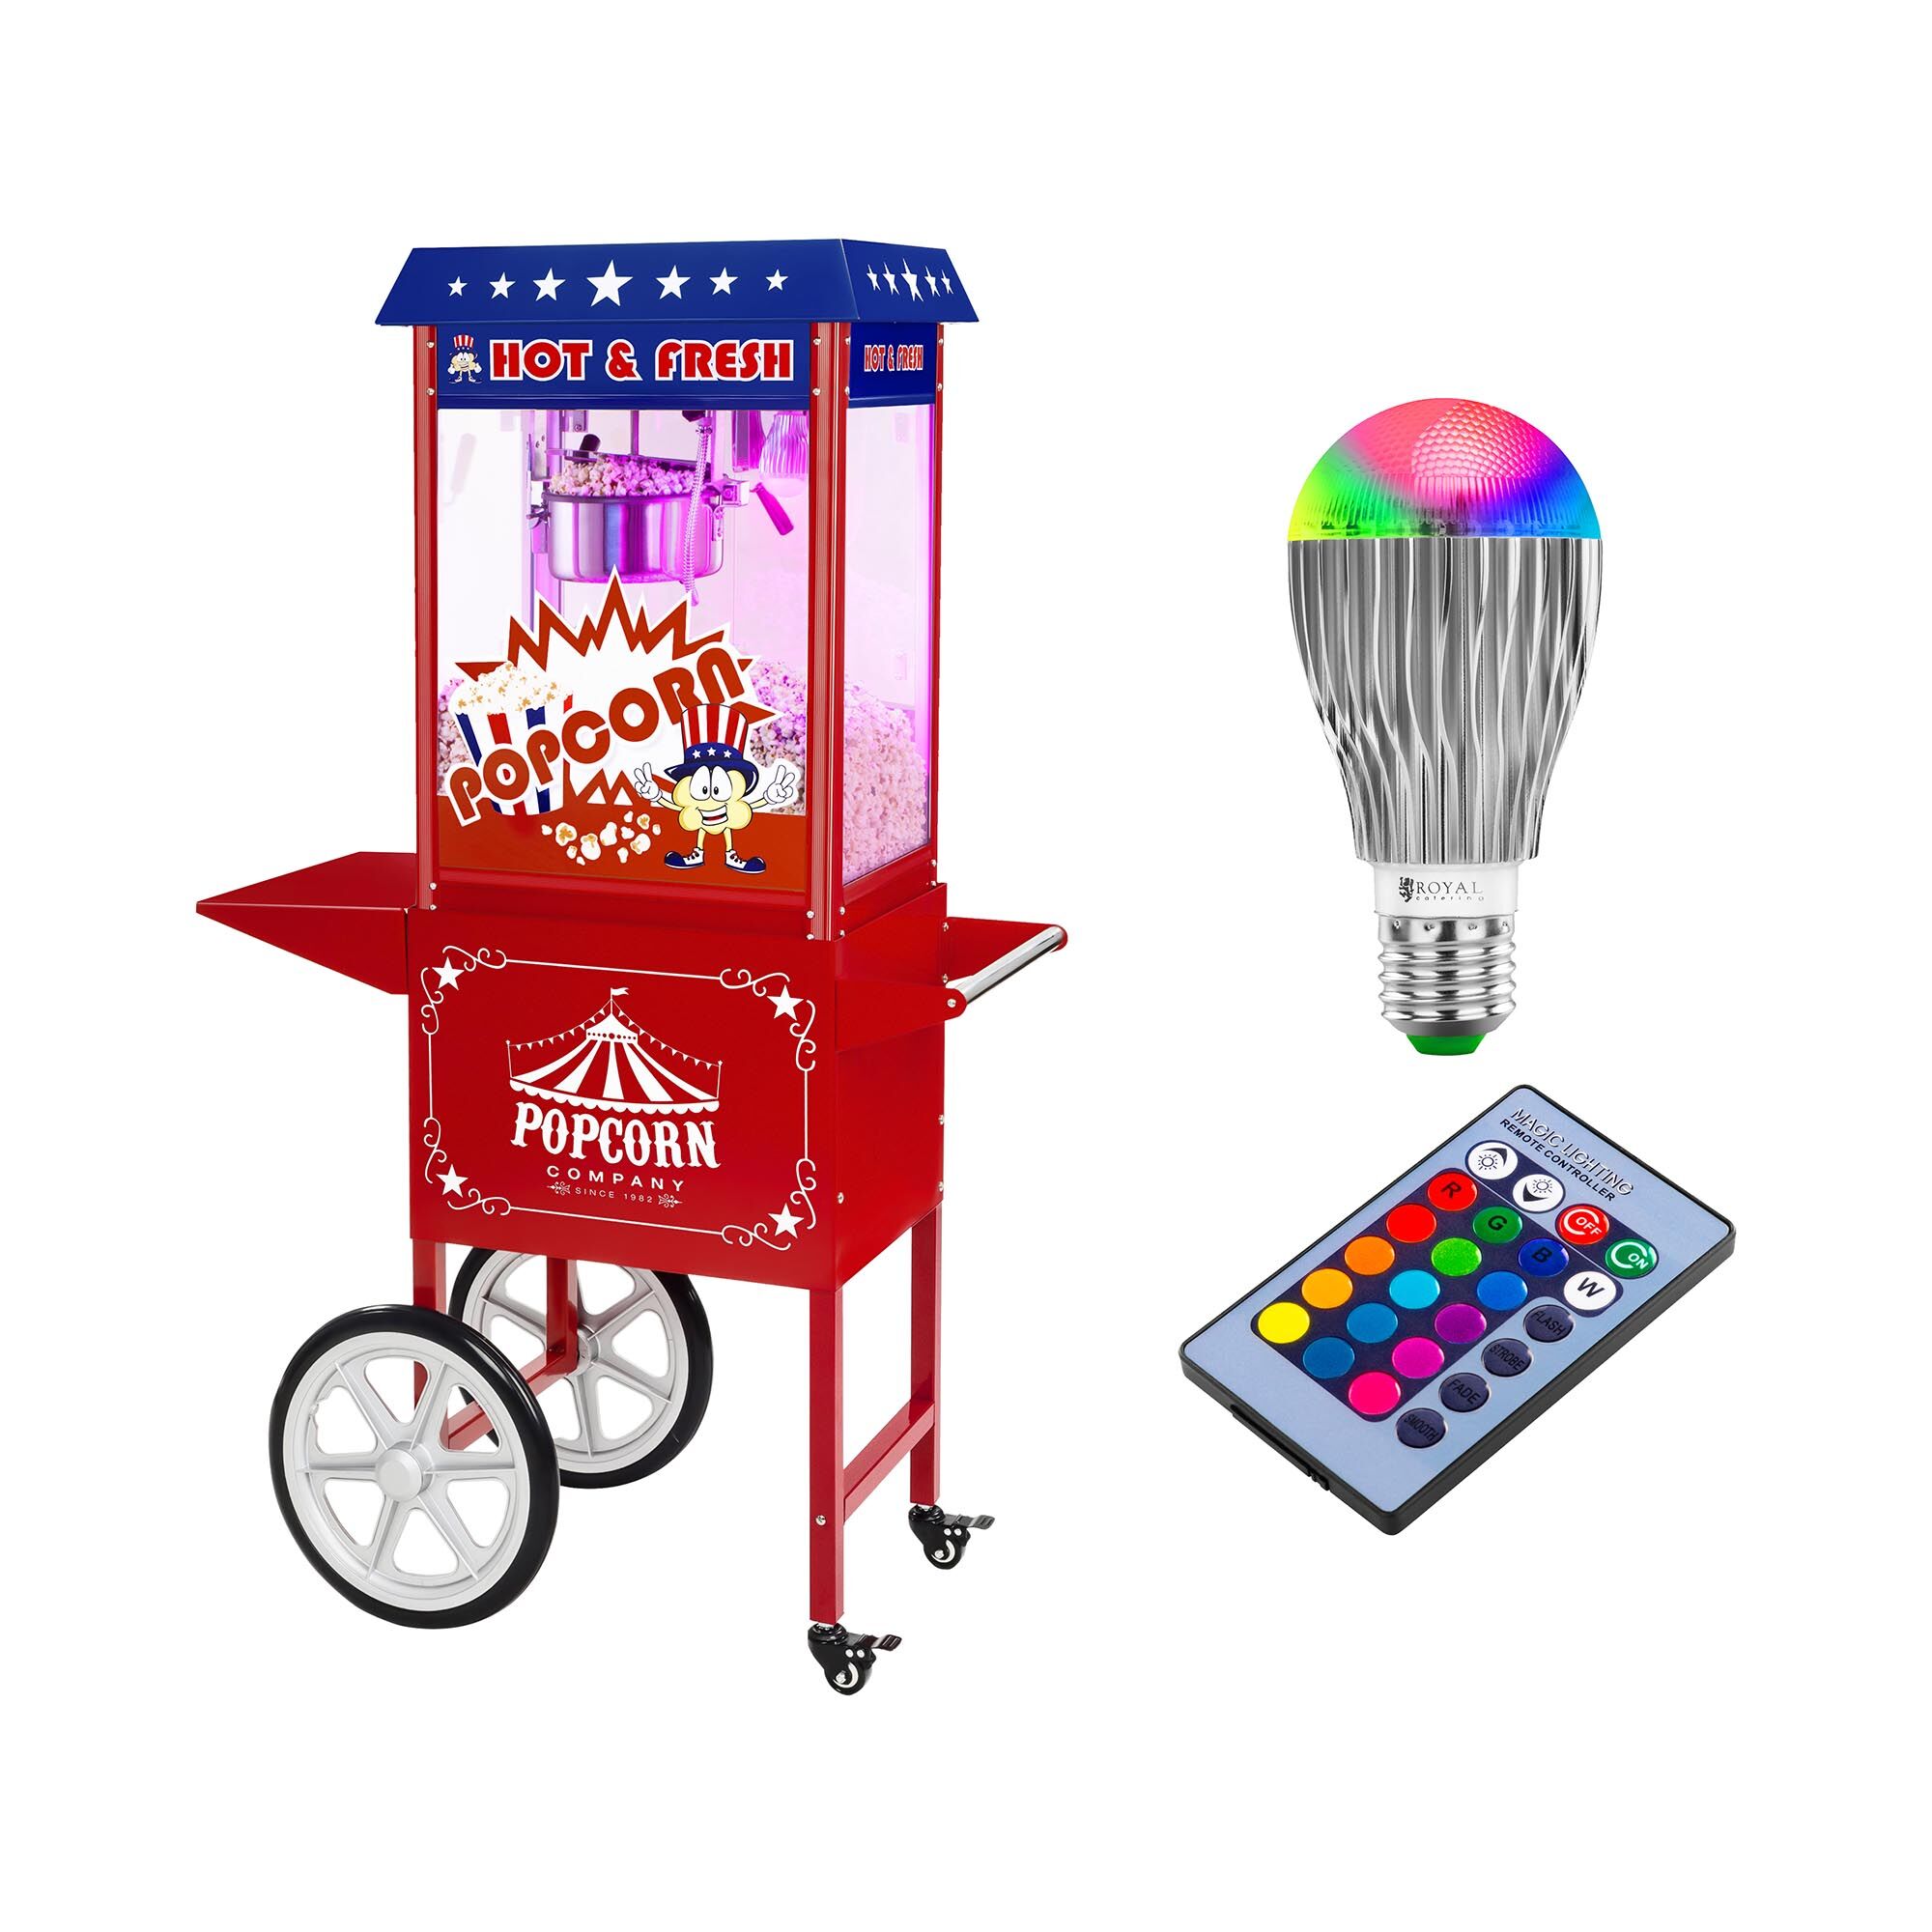 Royal Catering Popcorn machine with cart and LED RGB-Lighting - USA Design - red